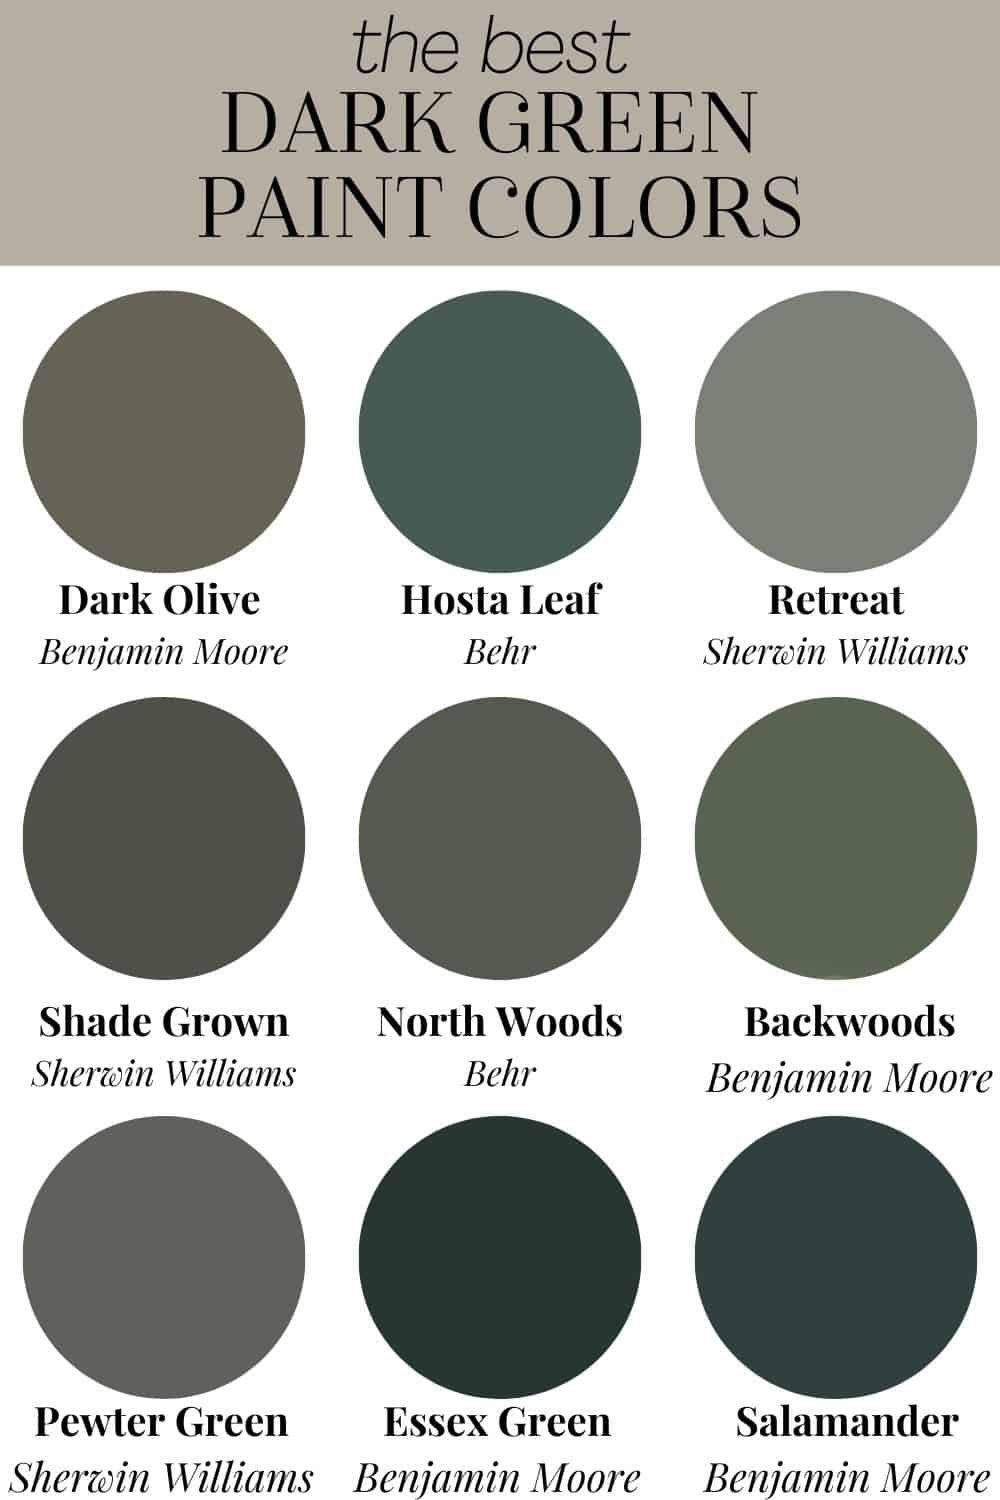 collage of the best dark green paint colors from Behr, Sherwin Williams, and Benjamin Moore